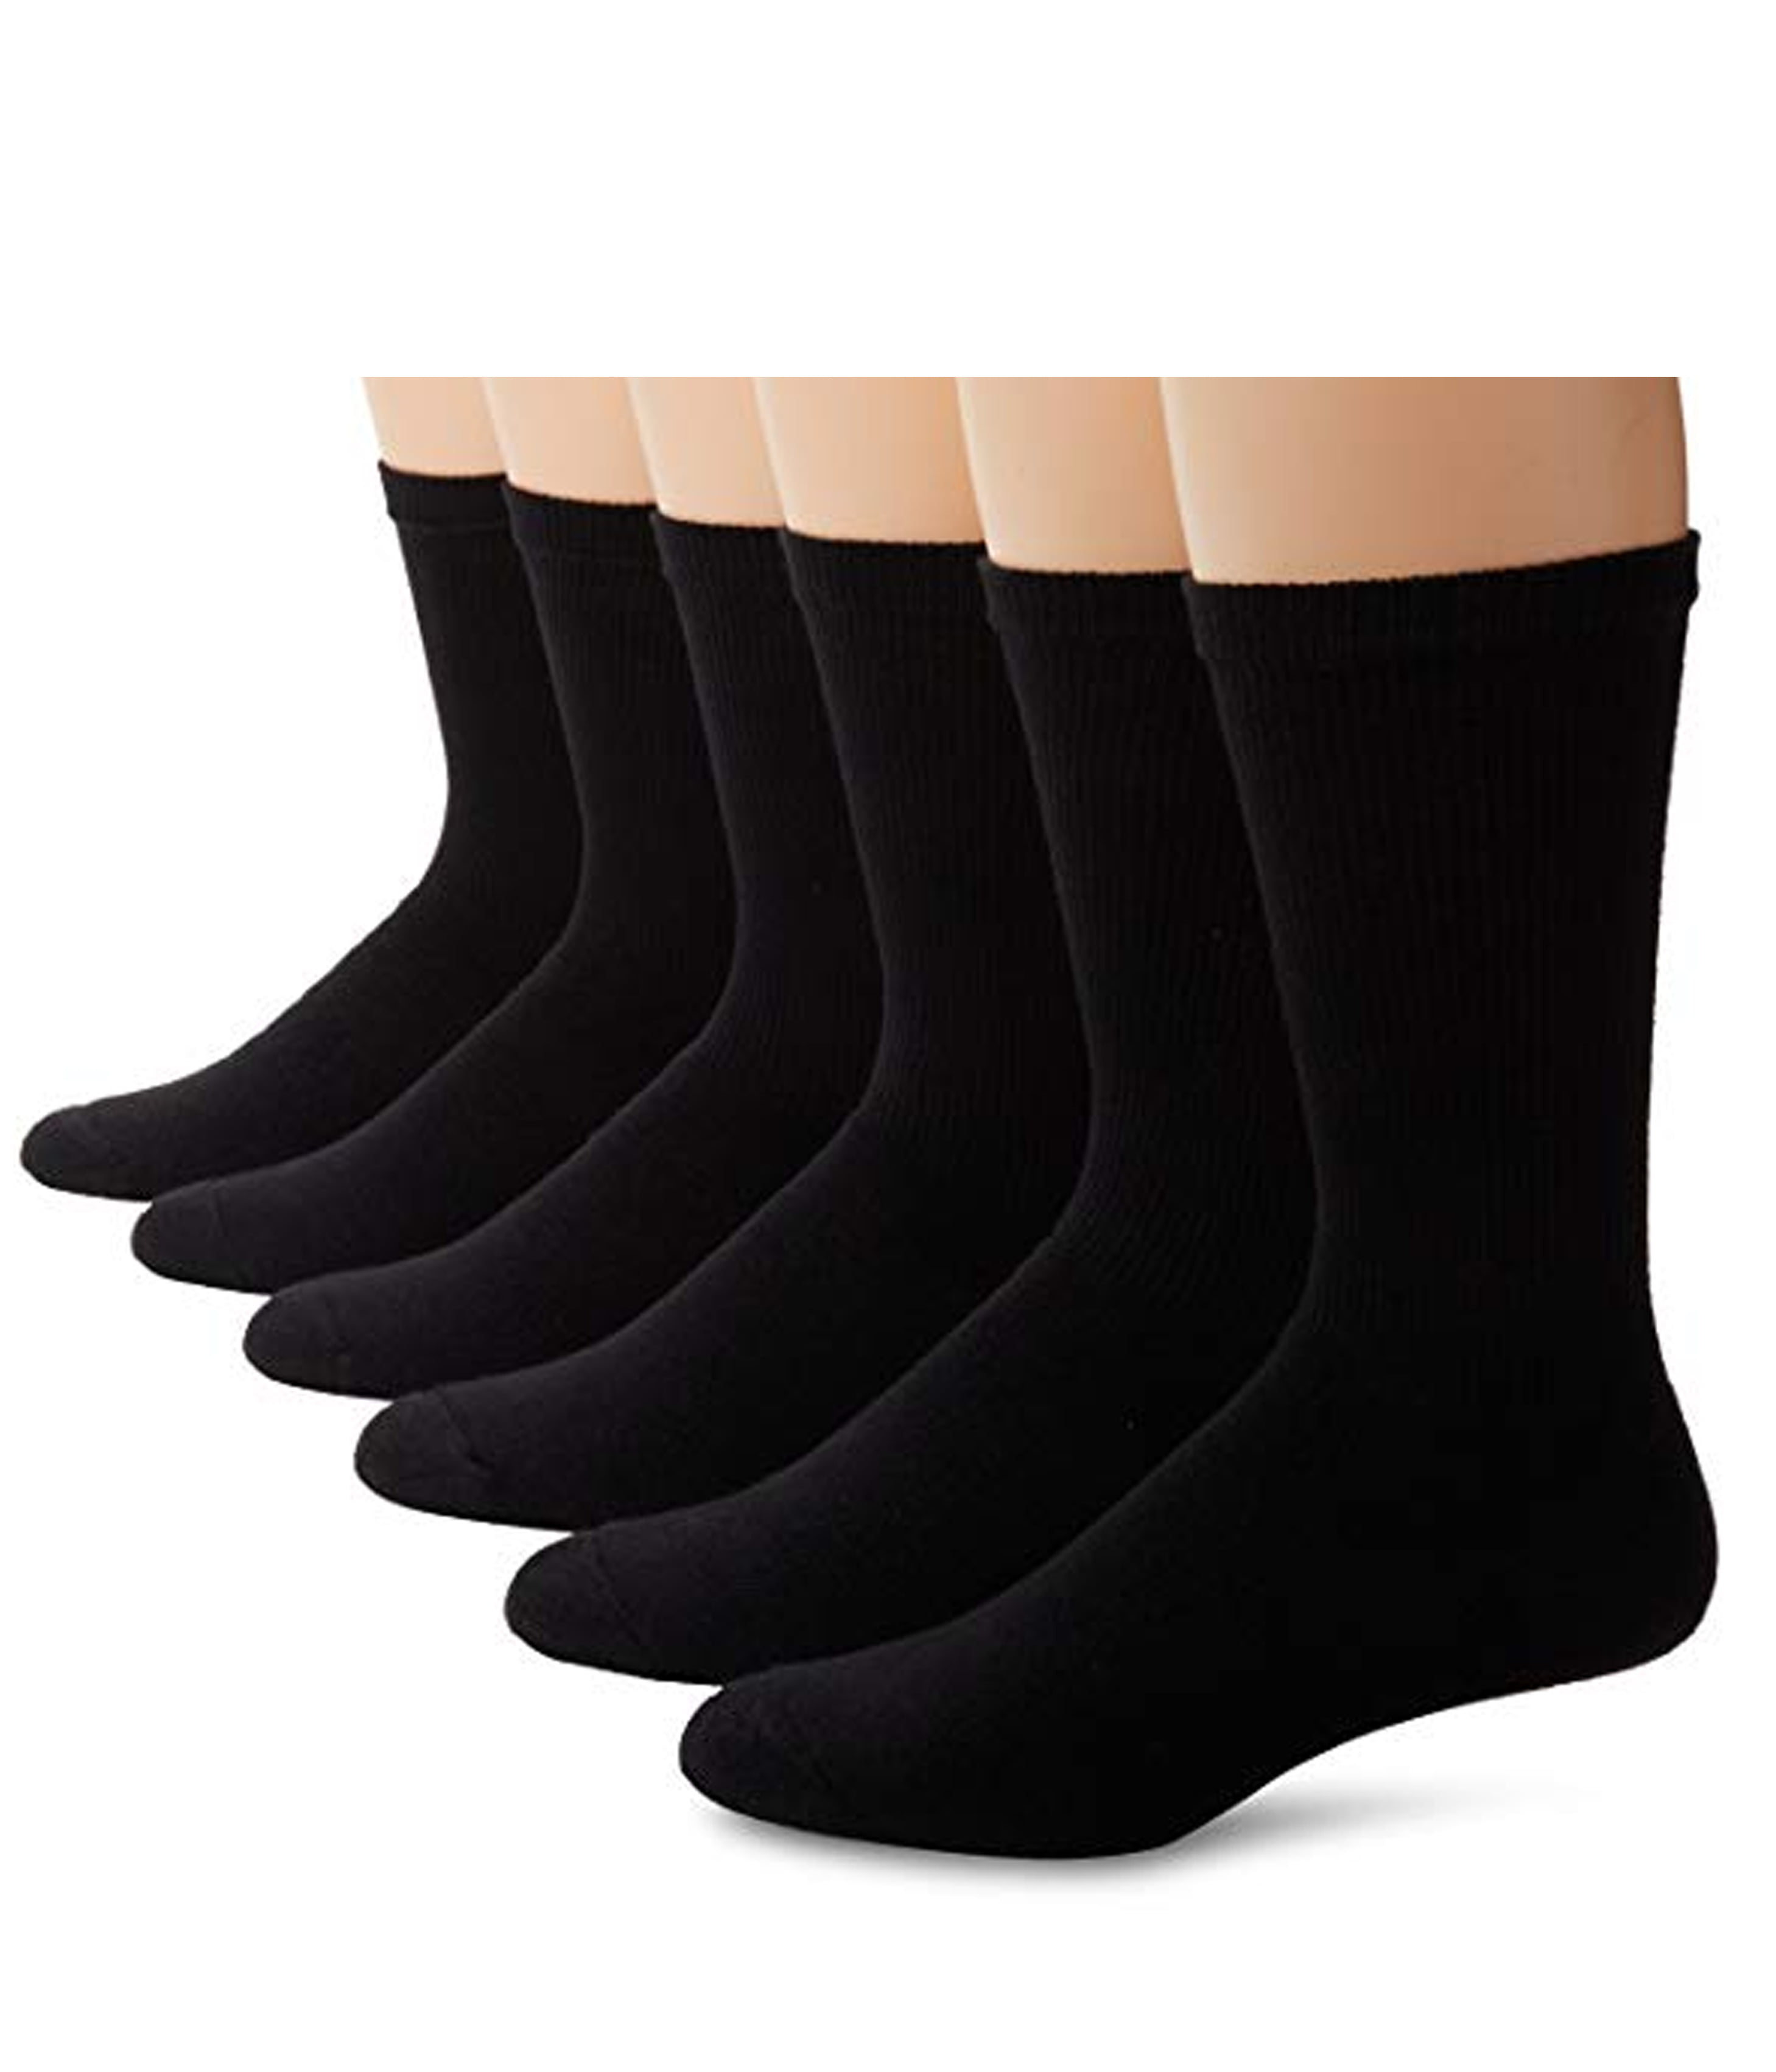 3 Pairs For Mens White Sports Athletic Work Crew Socks Cotton Size 9-11 10-13 